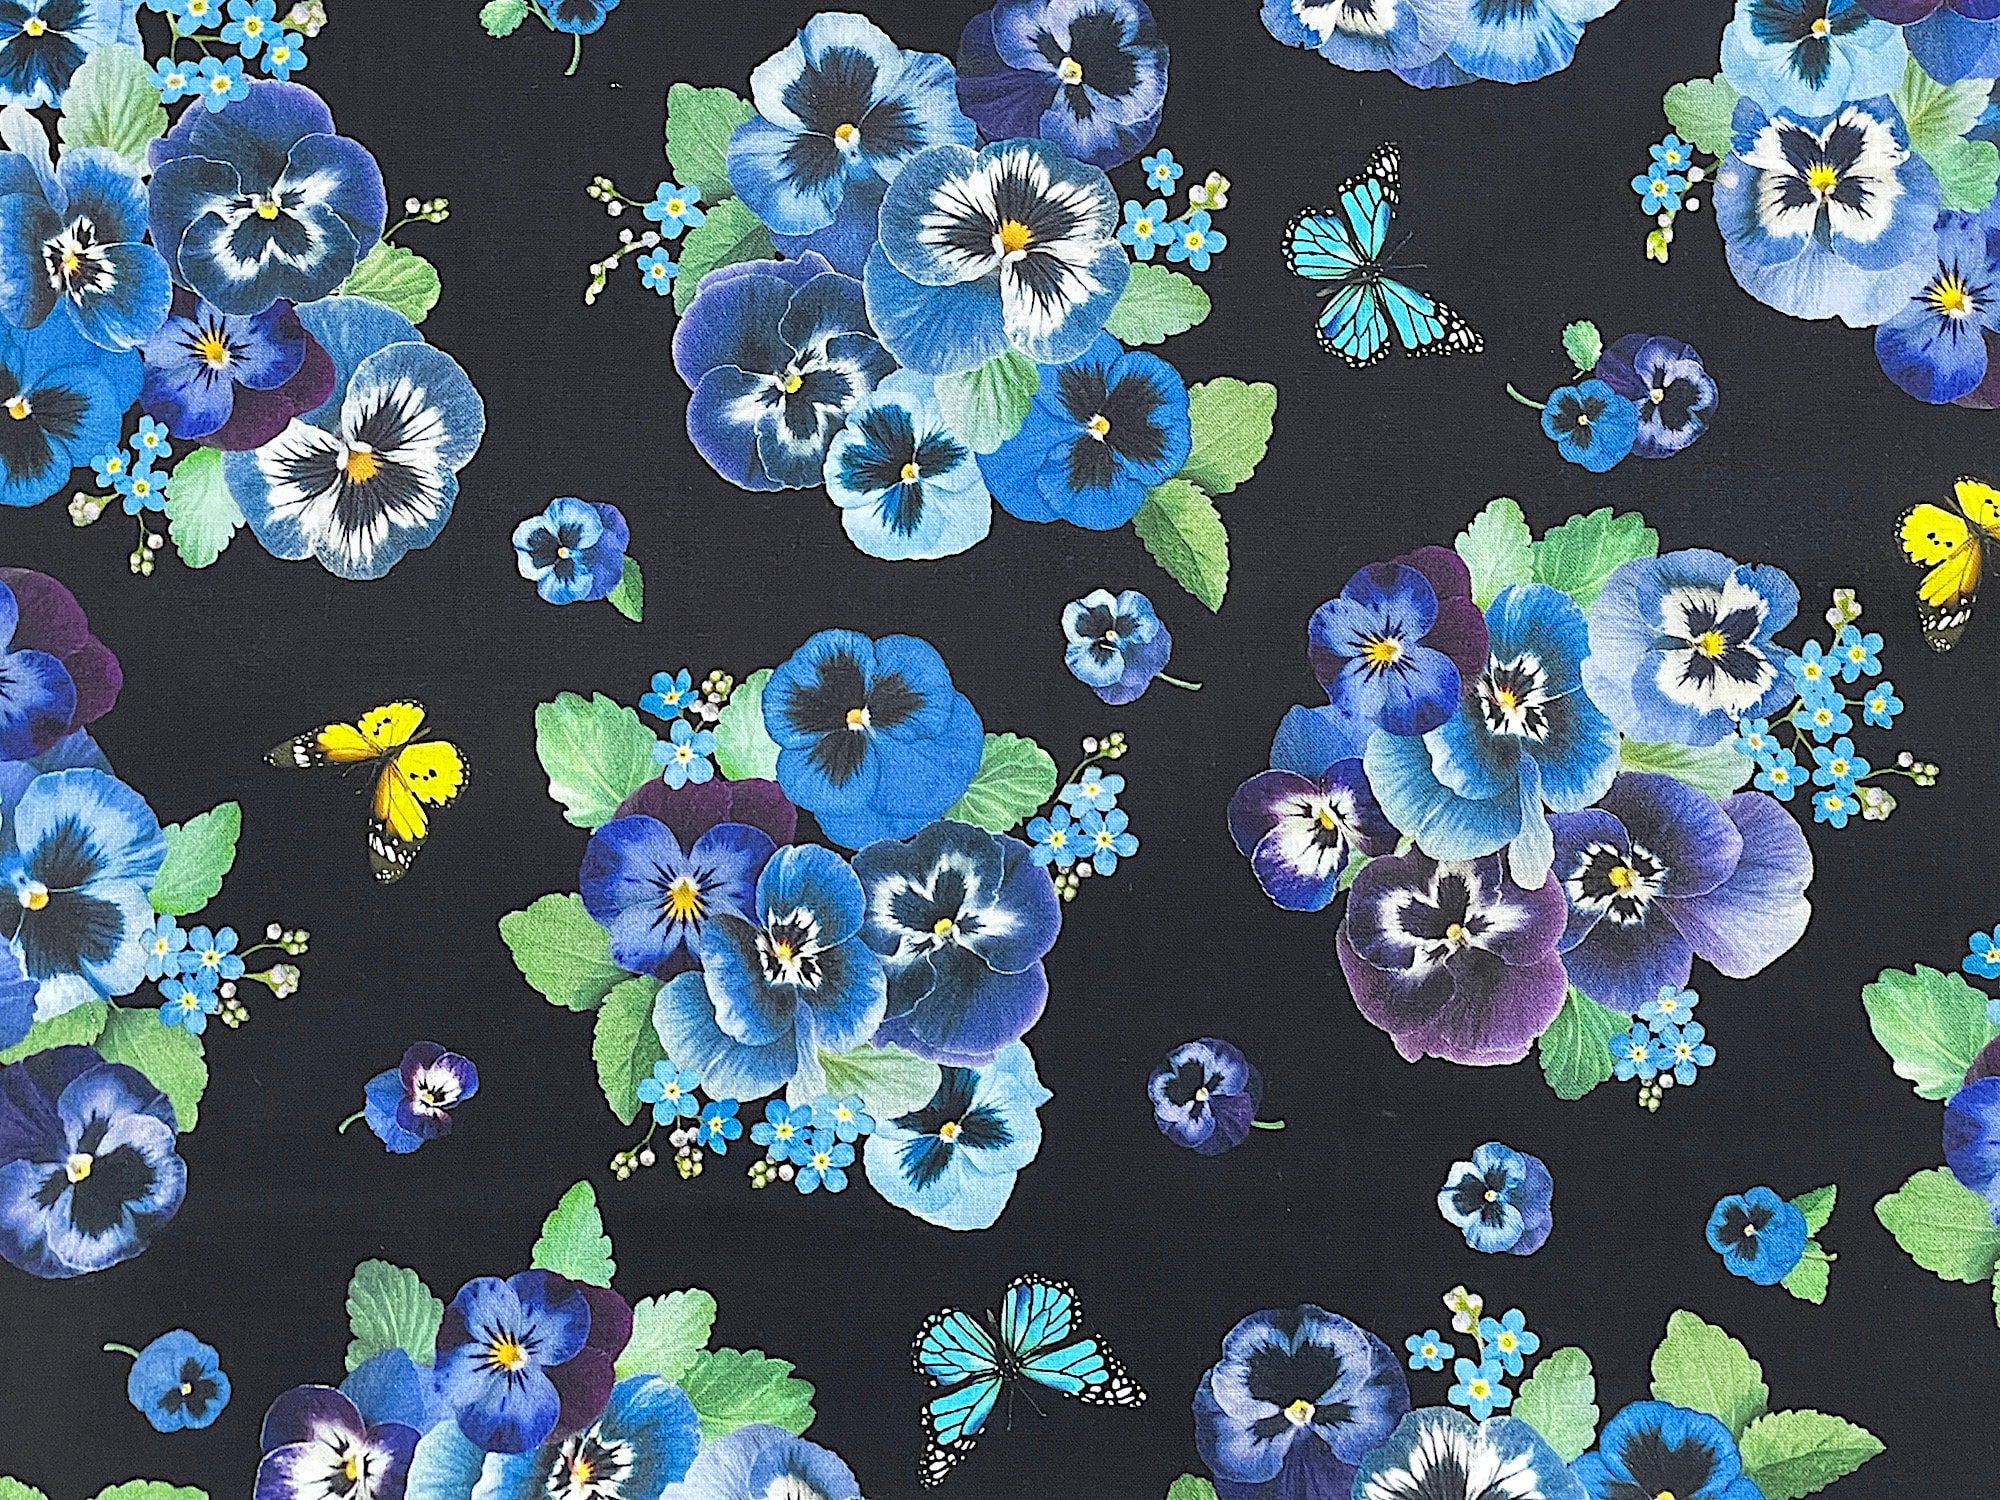 This fabric is called Pansy Bouquet and is covered with bouquets of pansies. The Pansies are shades of yellow, blue, and lavender. There are also pansy leaves and yellow butterflies. This fabric is part of the Bouquets and Butterflies Collection.